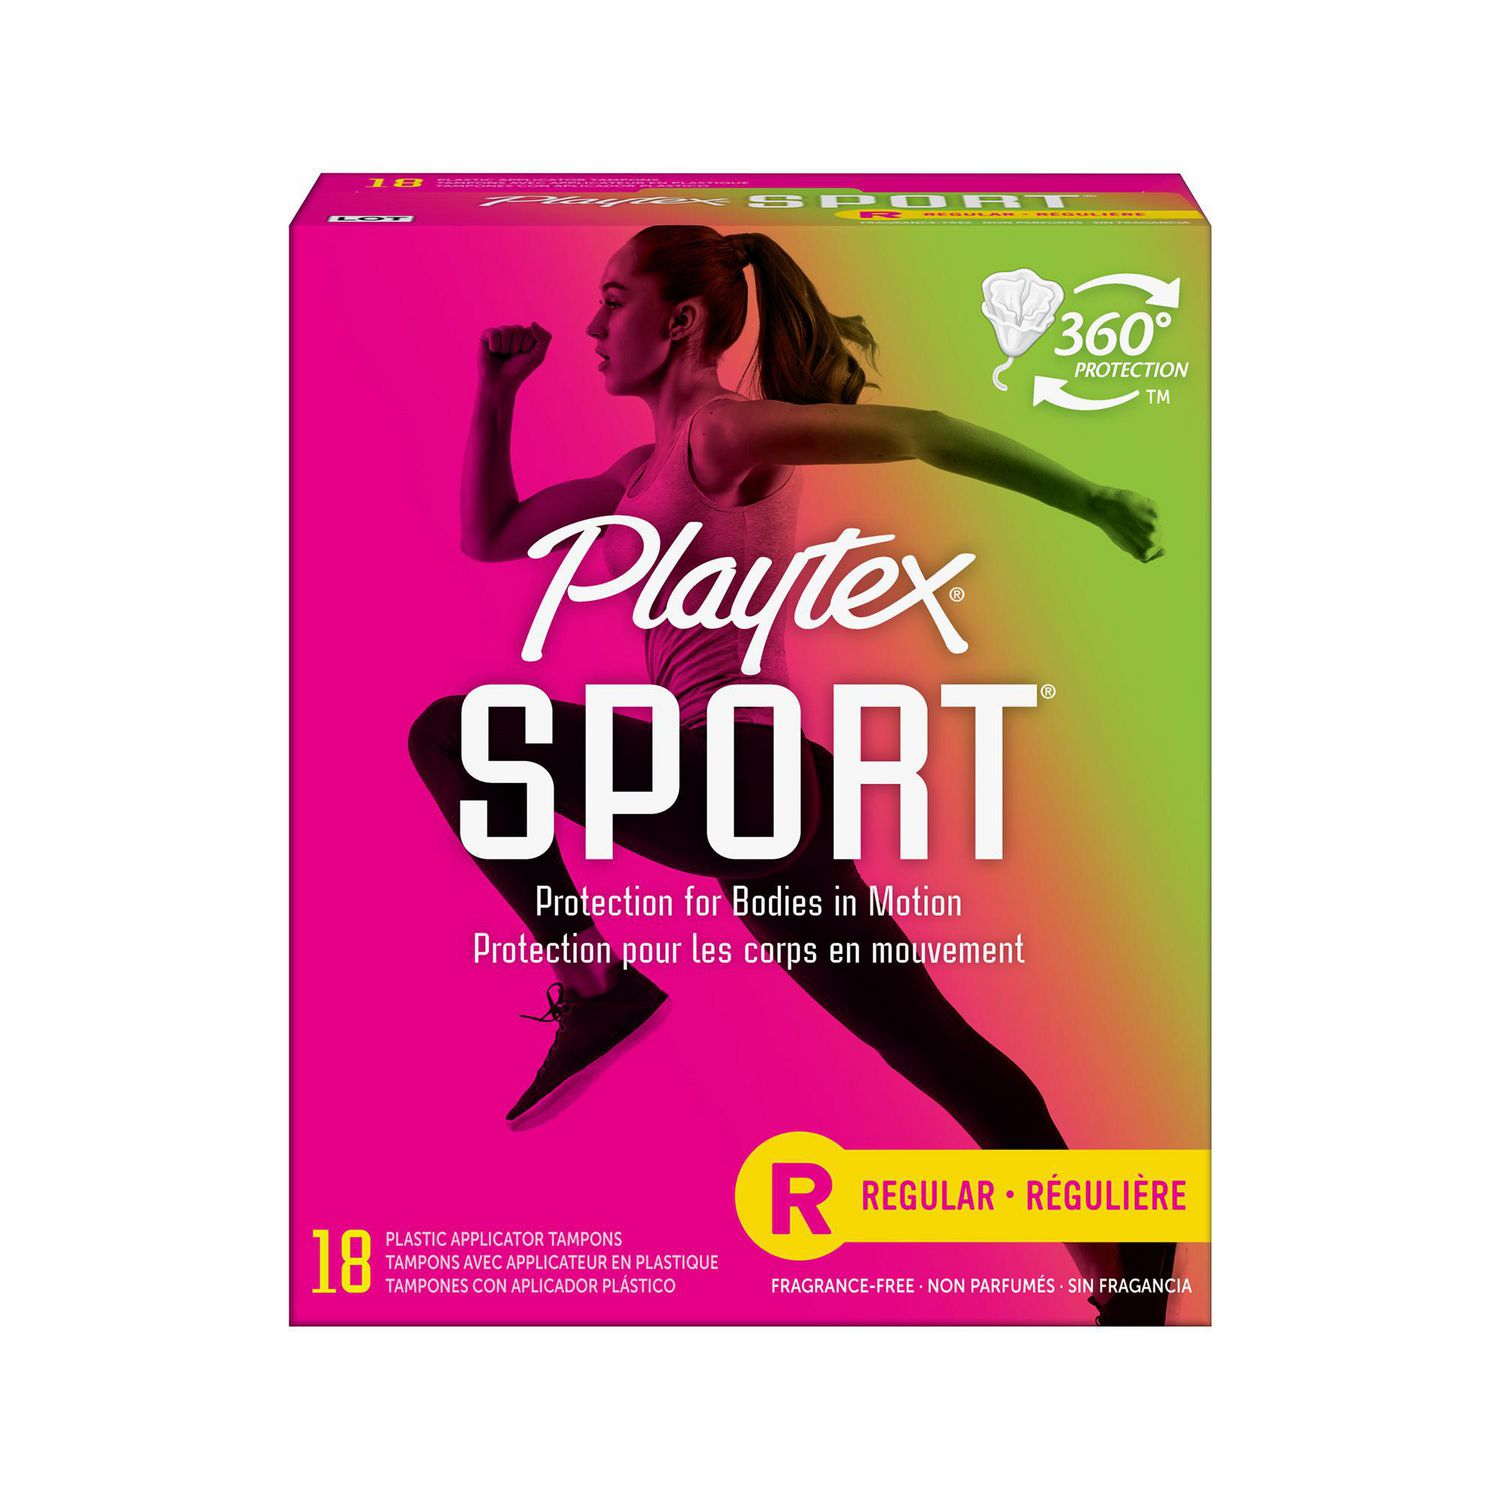 Playtex Tampons Sport Regular 18 Count Unscented